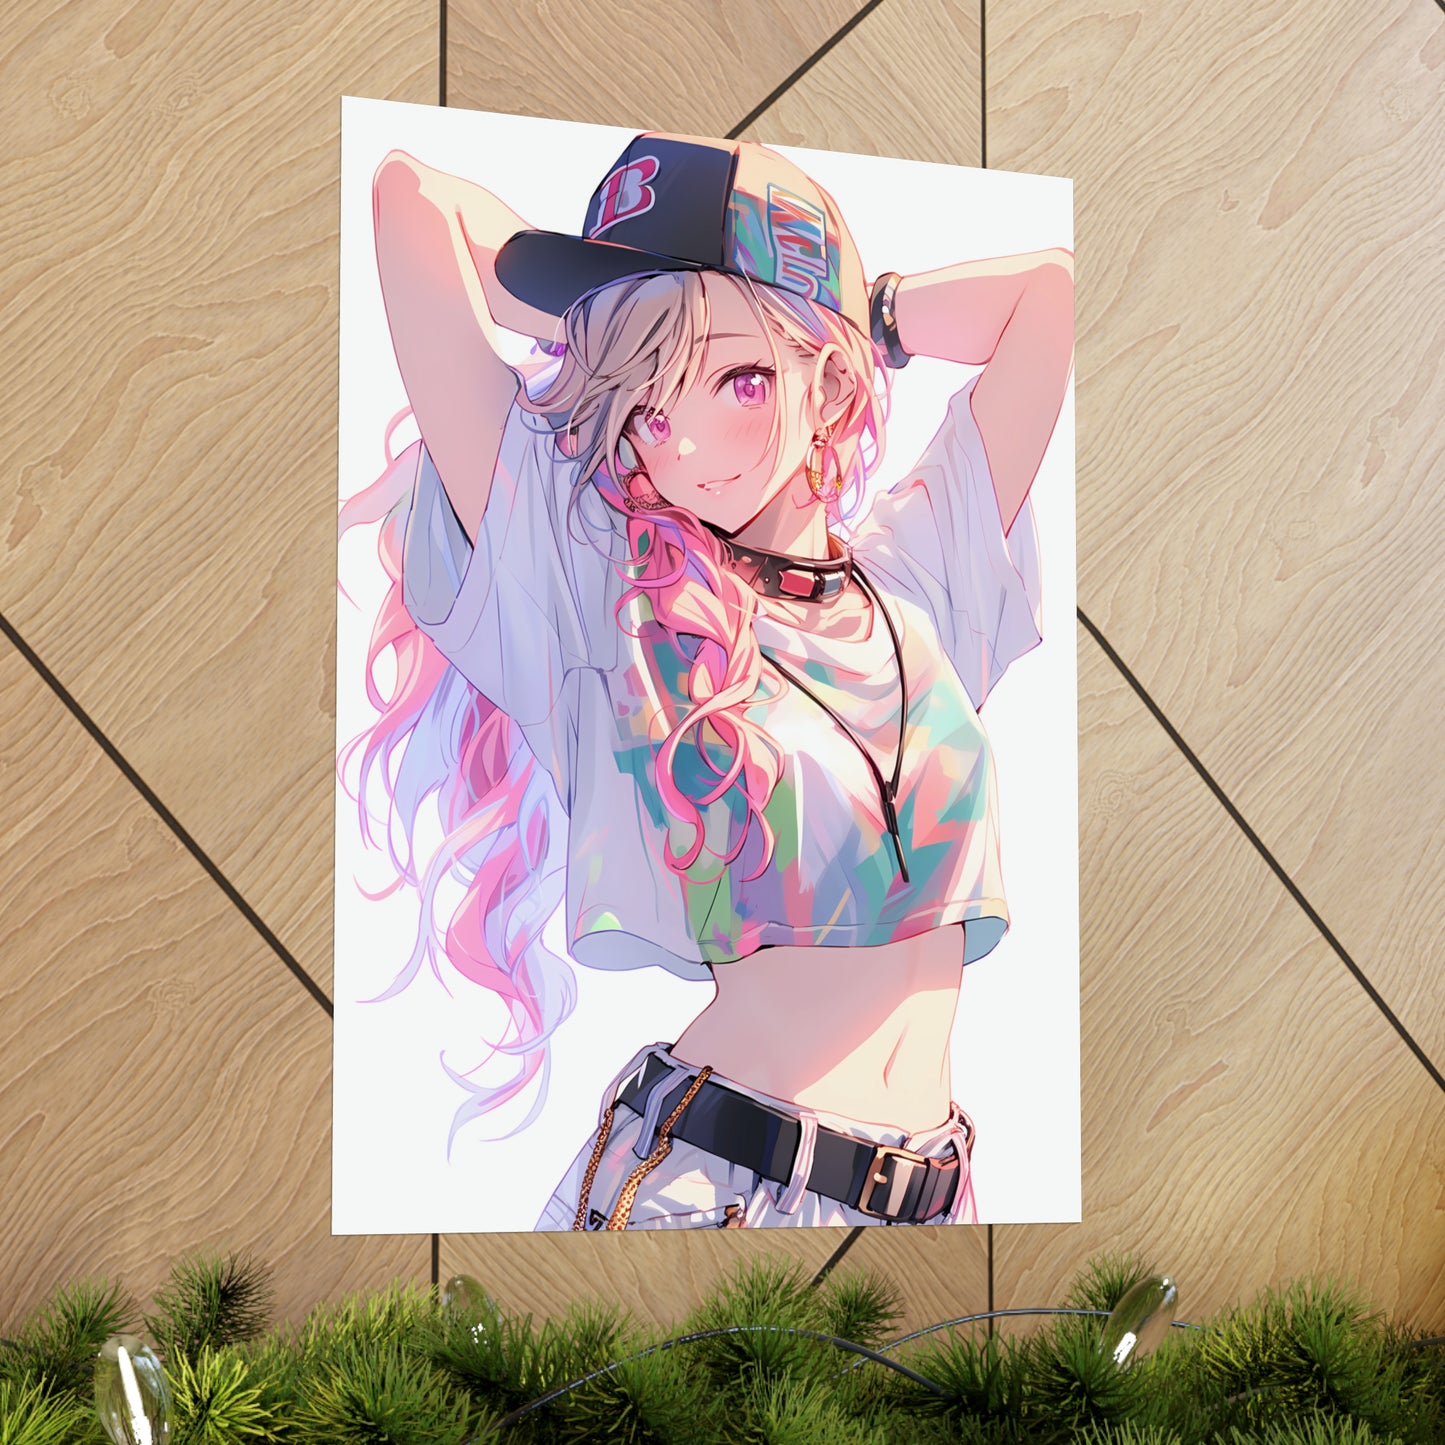 Pastel Kfashion Fit - Cute Anime Girl Poster